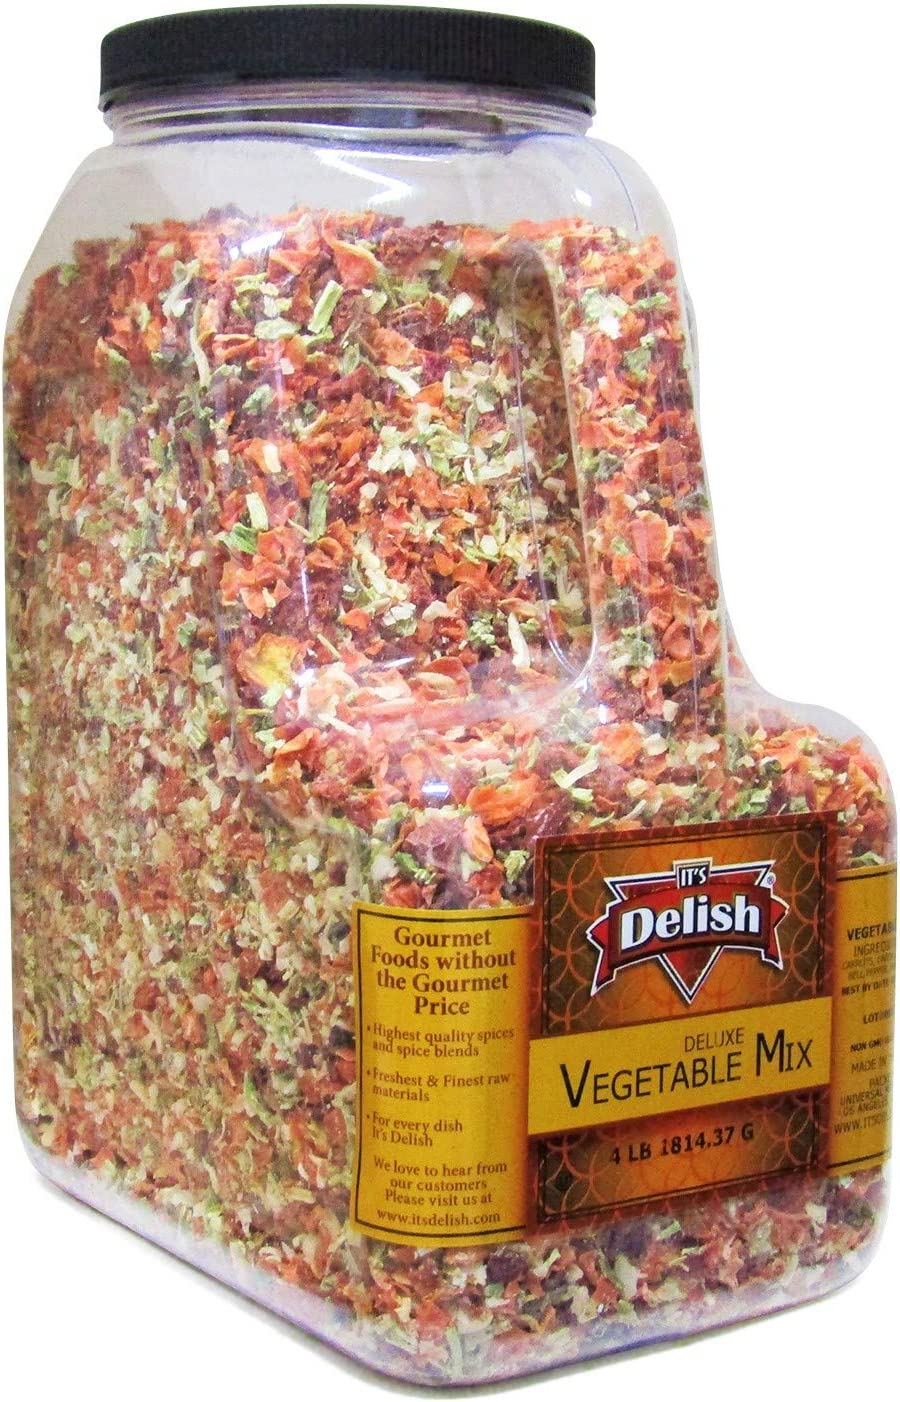 Deluxe Dried Vegetable Soup Mix by Its Delish, 4 LB Restaurant Gallon Size Jug With handle | Premium Blend of Dehydrated Vegetables | Cooking, Camping, Emergency Food Supply – No MSG, Vegan, Kosher